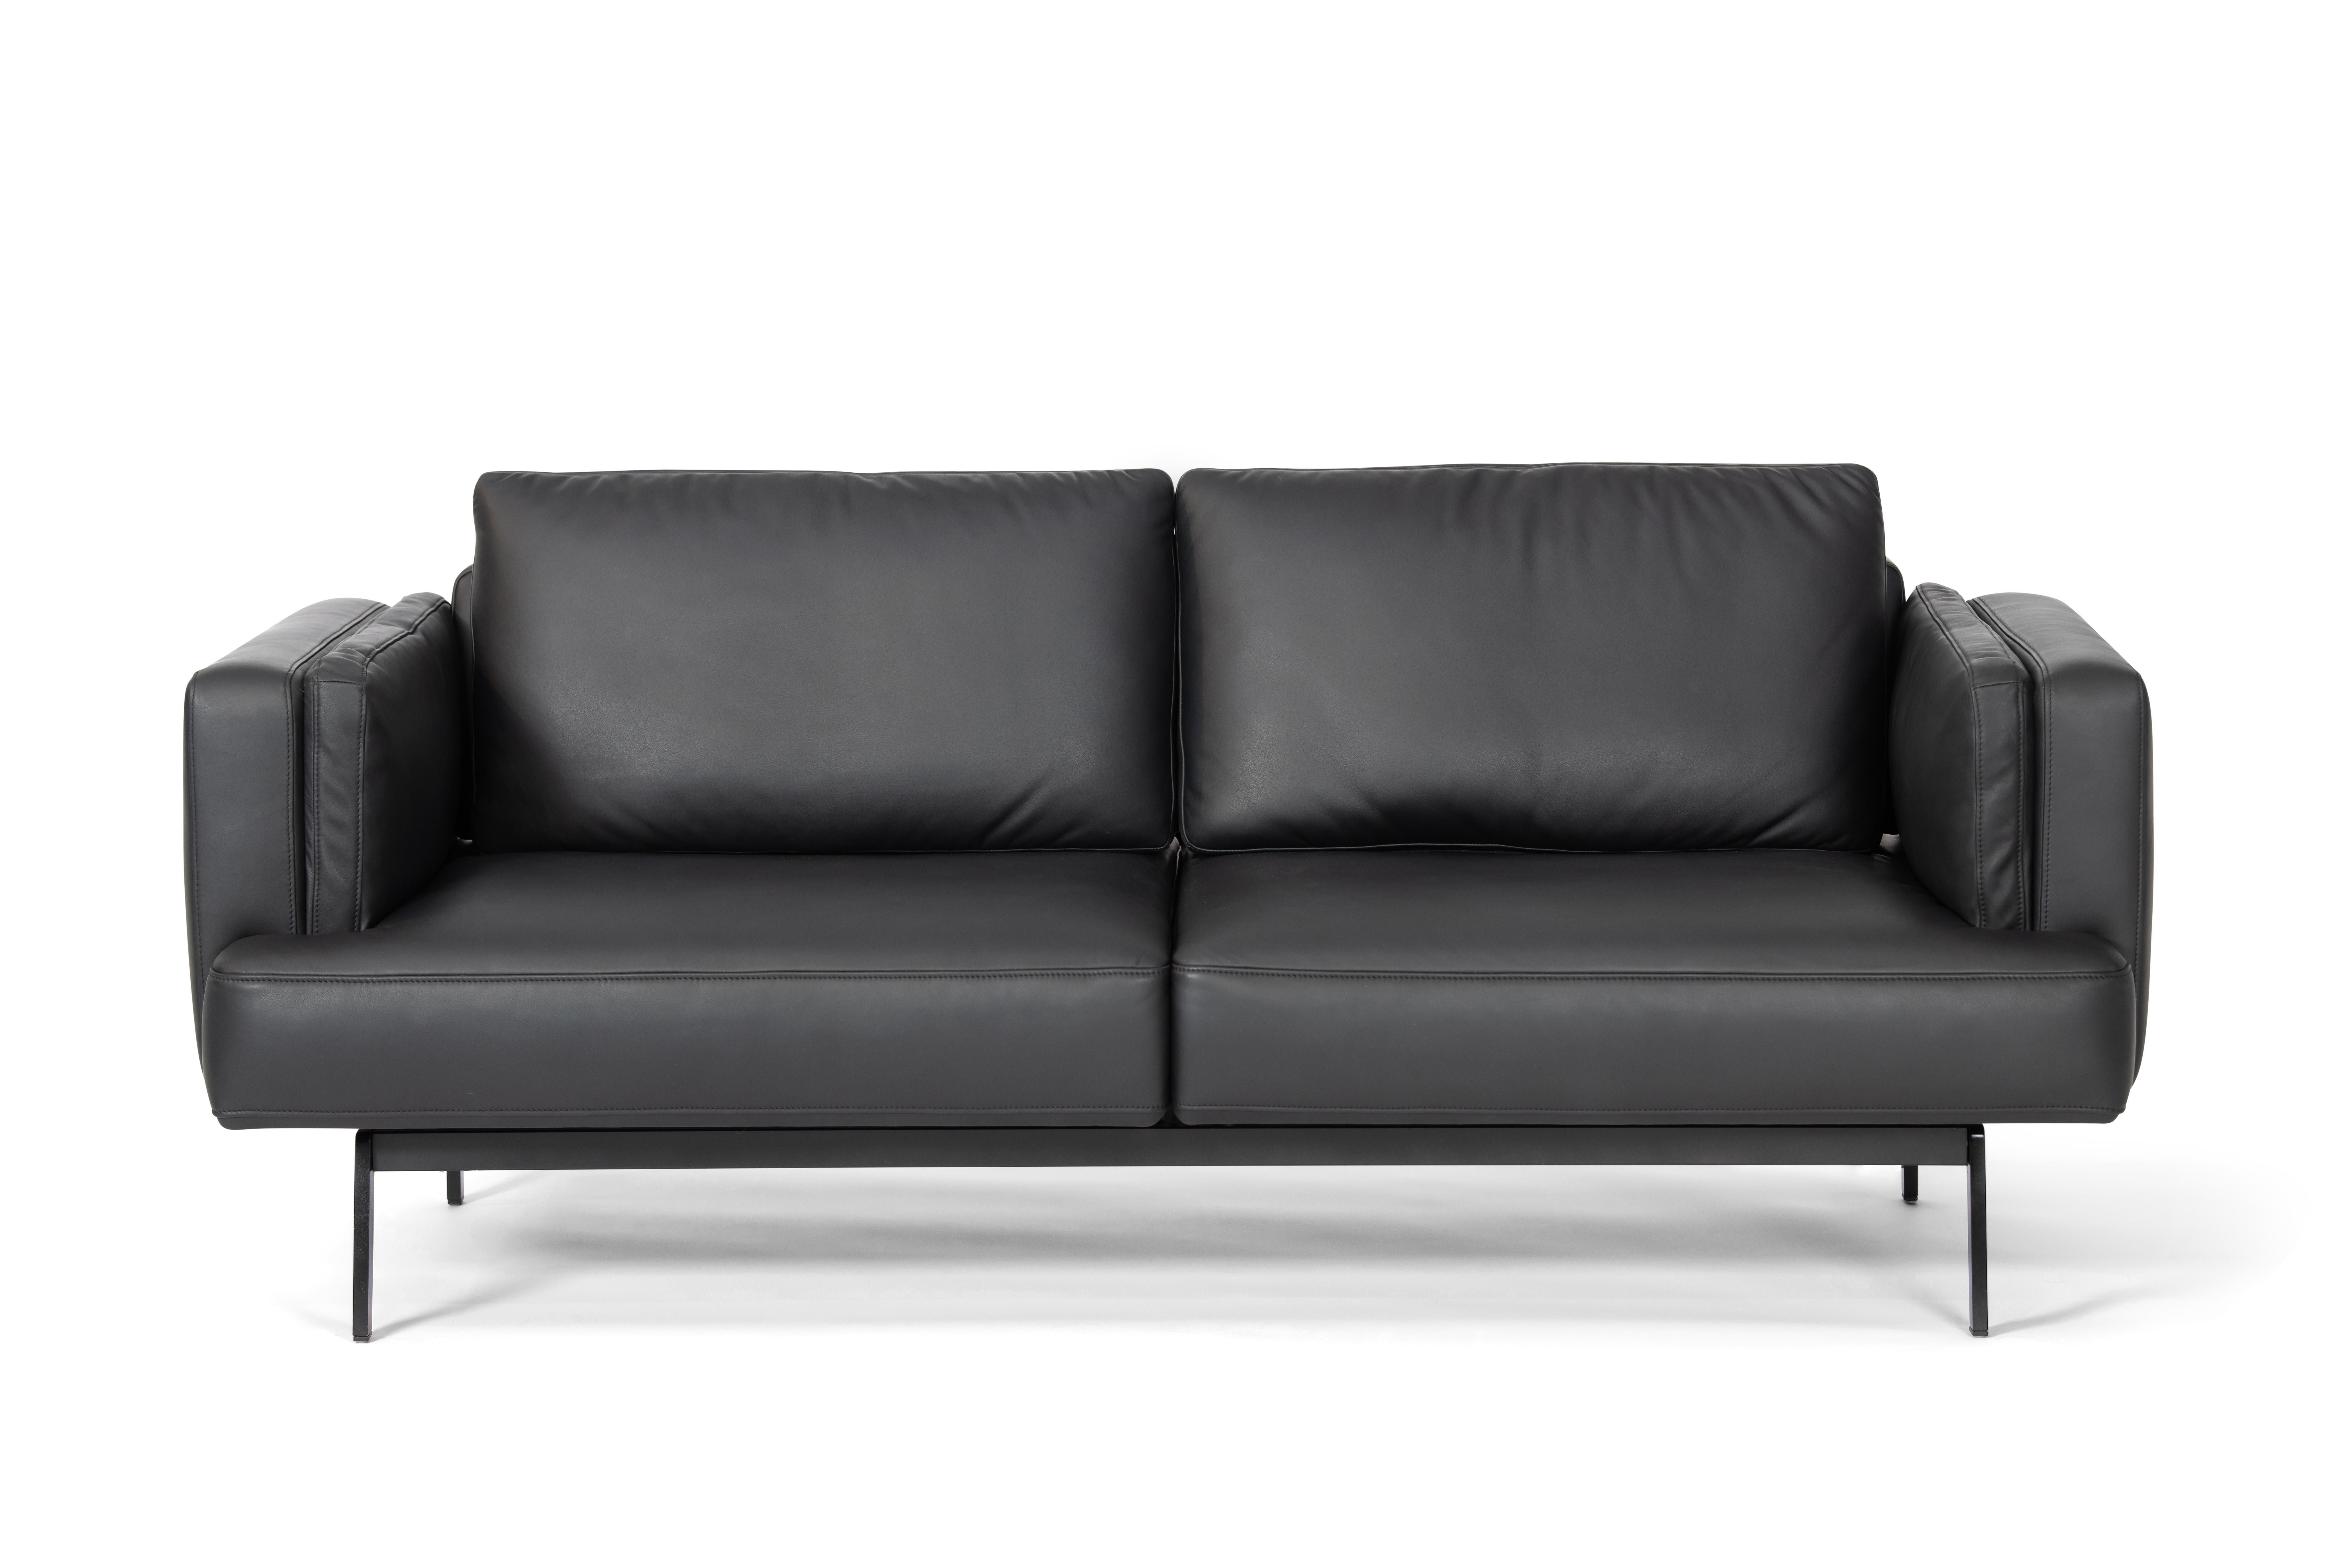 DeSede Ds-747/04 Multifunctional Sofa in Black Leather Seat and Back Upholstery For Sale 4